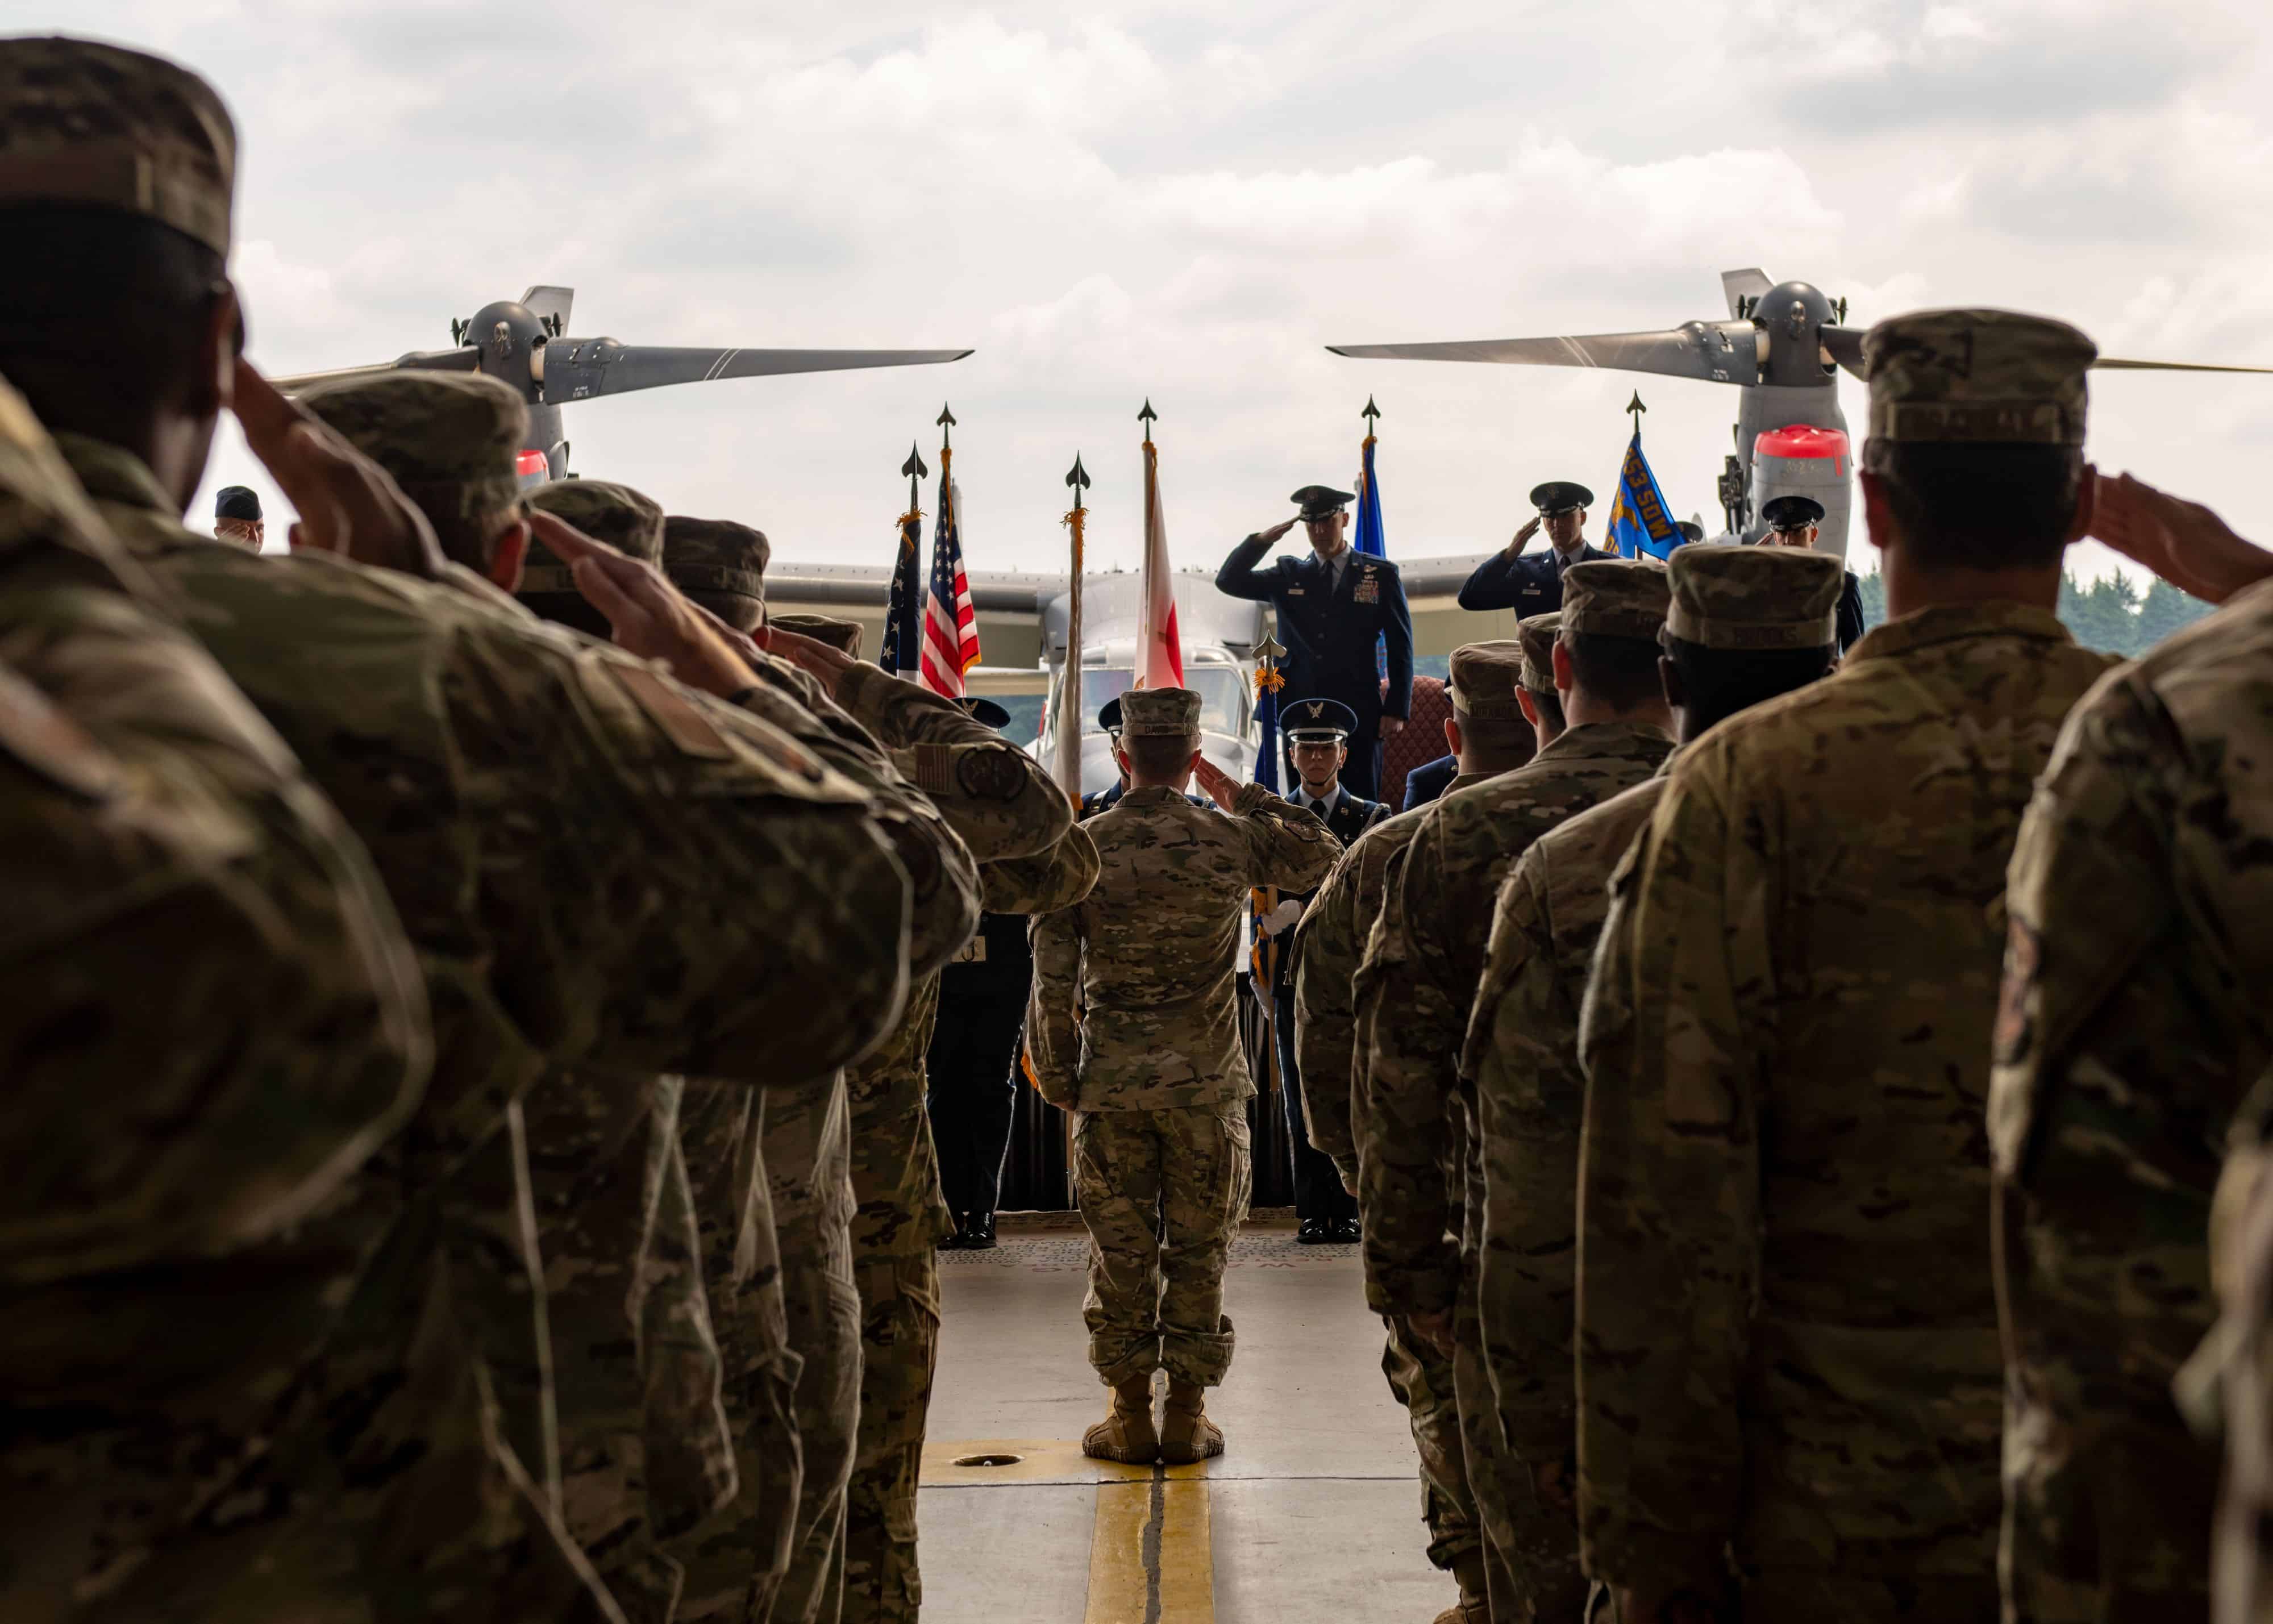 Col. Shane Vesely, 353rd Special Operations Wing commander, salutes the Airmen of the 21st Special Operations Squadron during a change of command ceremony for the 21st SOS at Yokota Air Base, Japan, June 3, 2022. Per military doctrine, the primary purpose of a change of command ceremony is to allow subordinates to witness the formal leadership changeover of one officer to another. (U.S. Air Force Photo by Staff Sgt. Ryan Lackey)